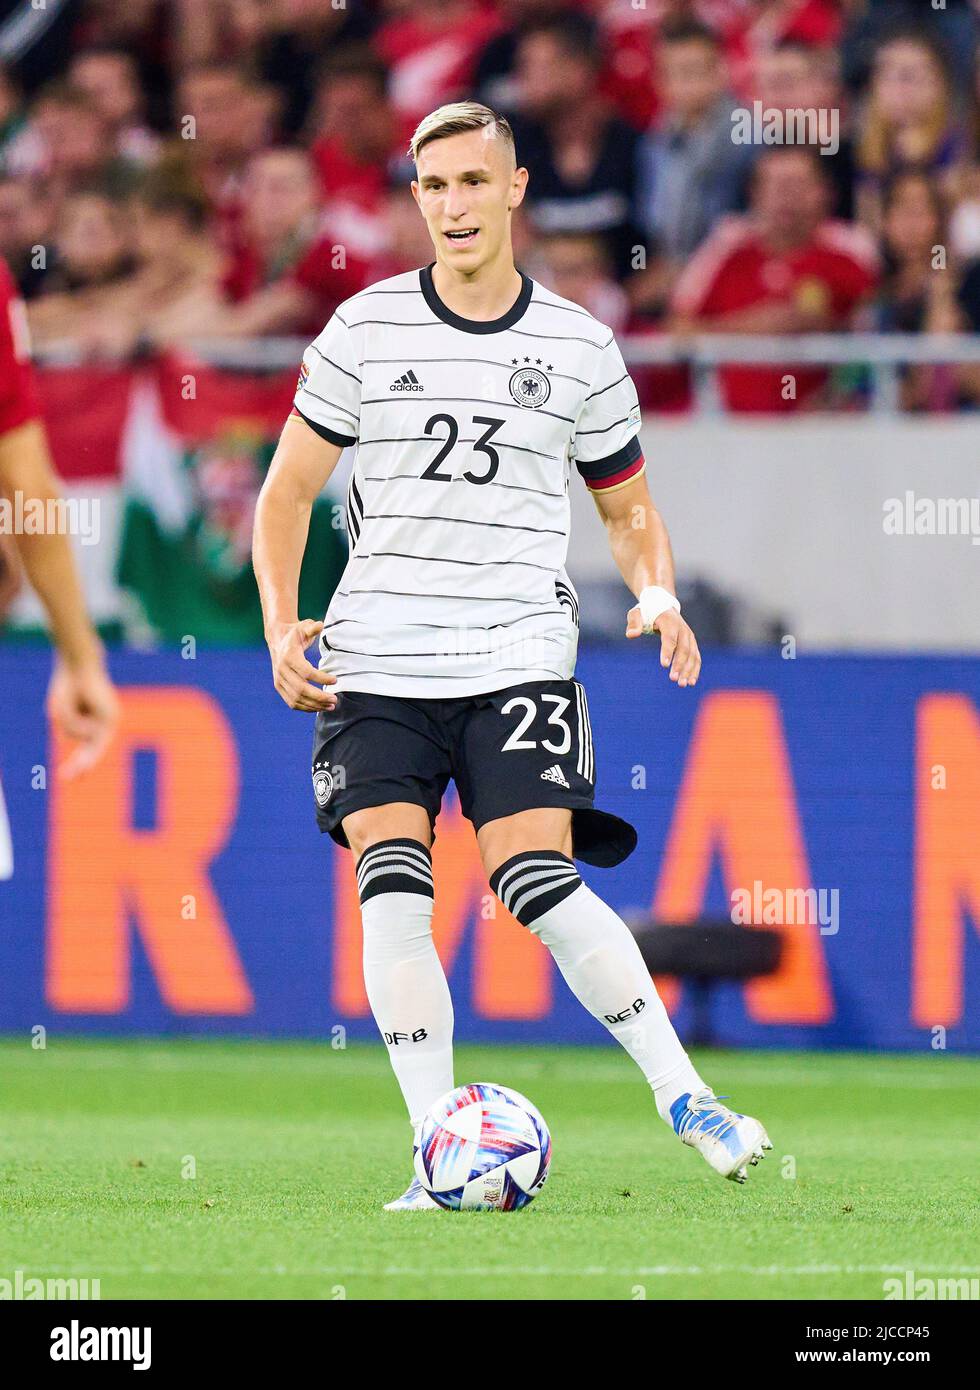 Nico Schlotterbeck, DFB 23  in the UEFA Nations League 2022 match HUNGARY - GERMANY 1-1  in Season 2022/2023 on Juni 11, 2022  in Budapest, Hungary.  © Peter Schatz / Alamy Live News Stock Photo